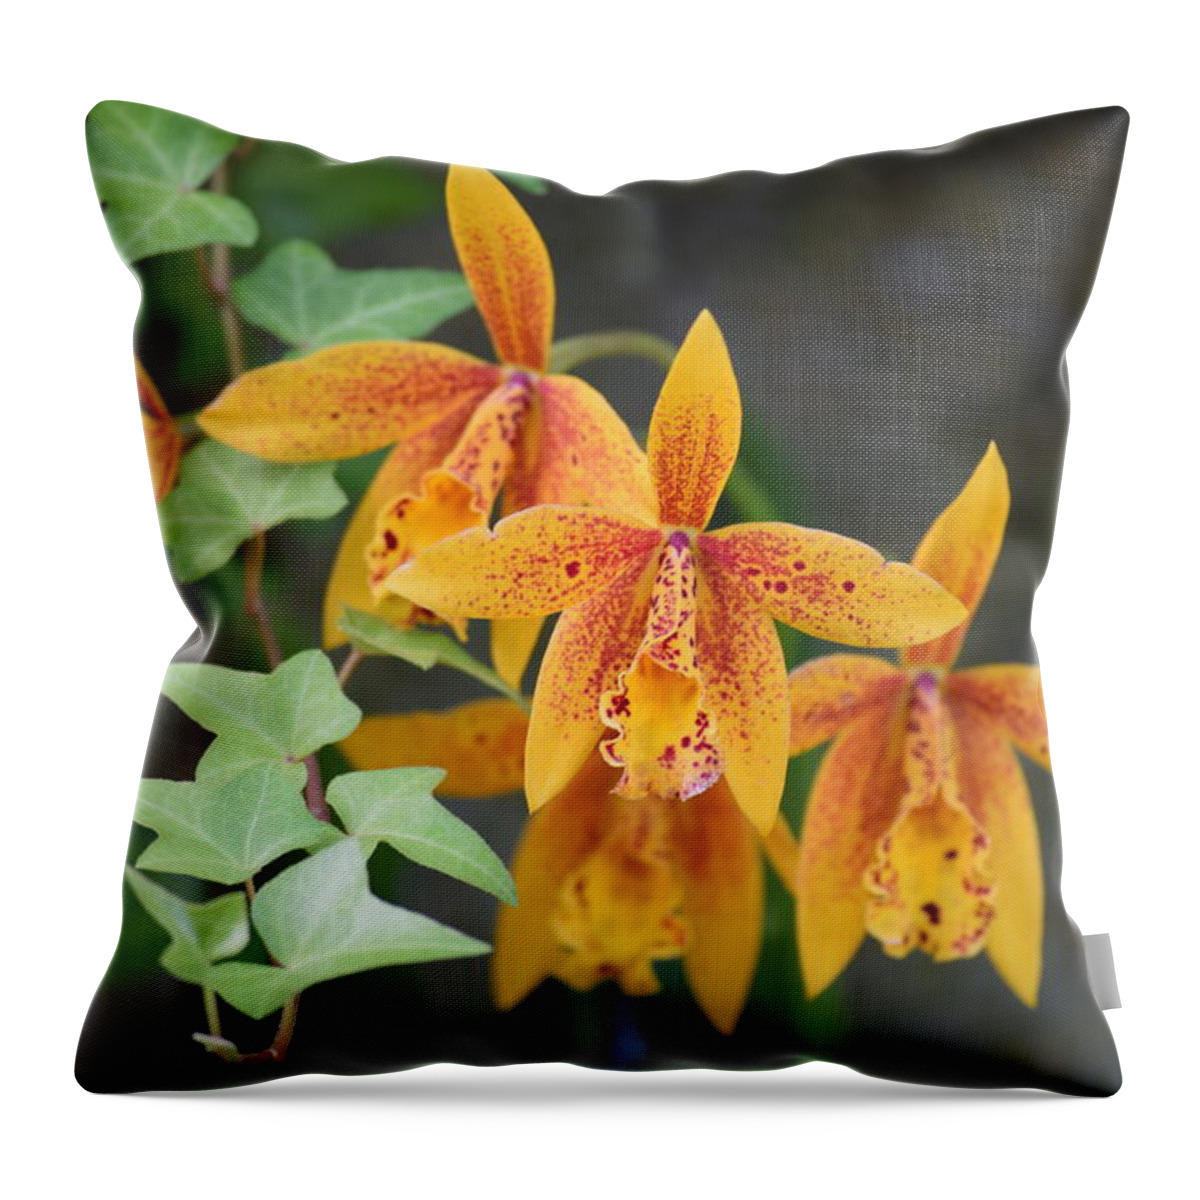 Orchid Throw Pillow featuring the photograph Freckled Flora by Deborah Crew-Johnson